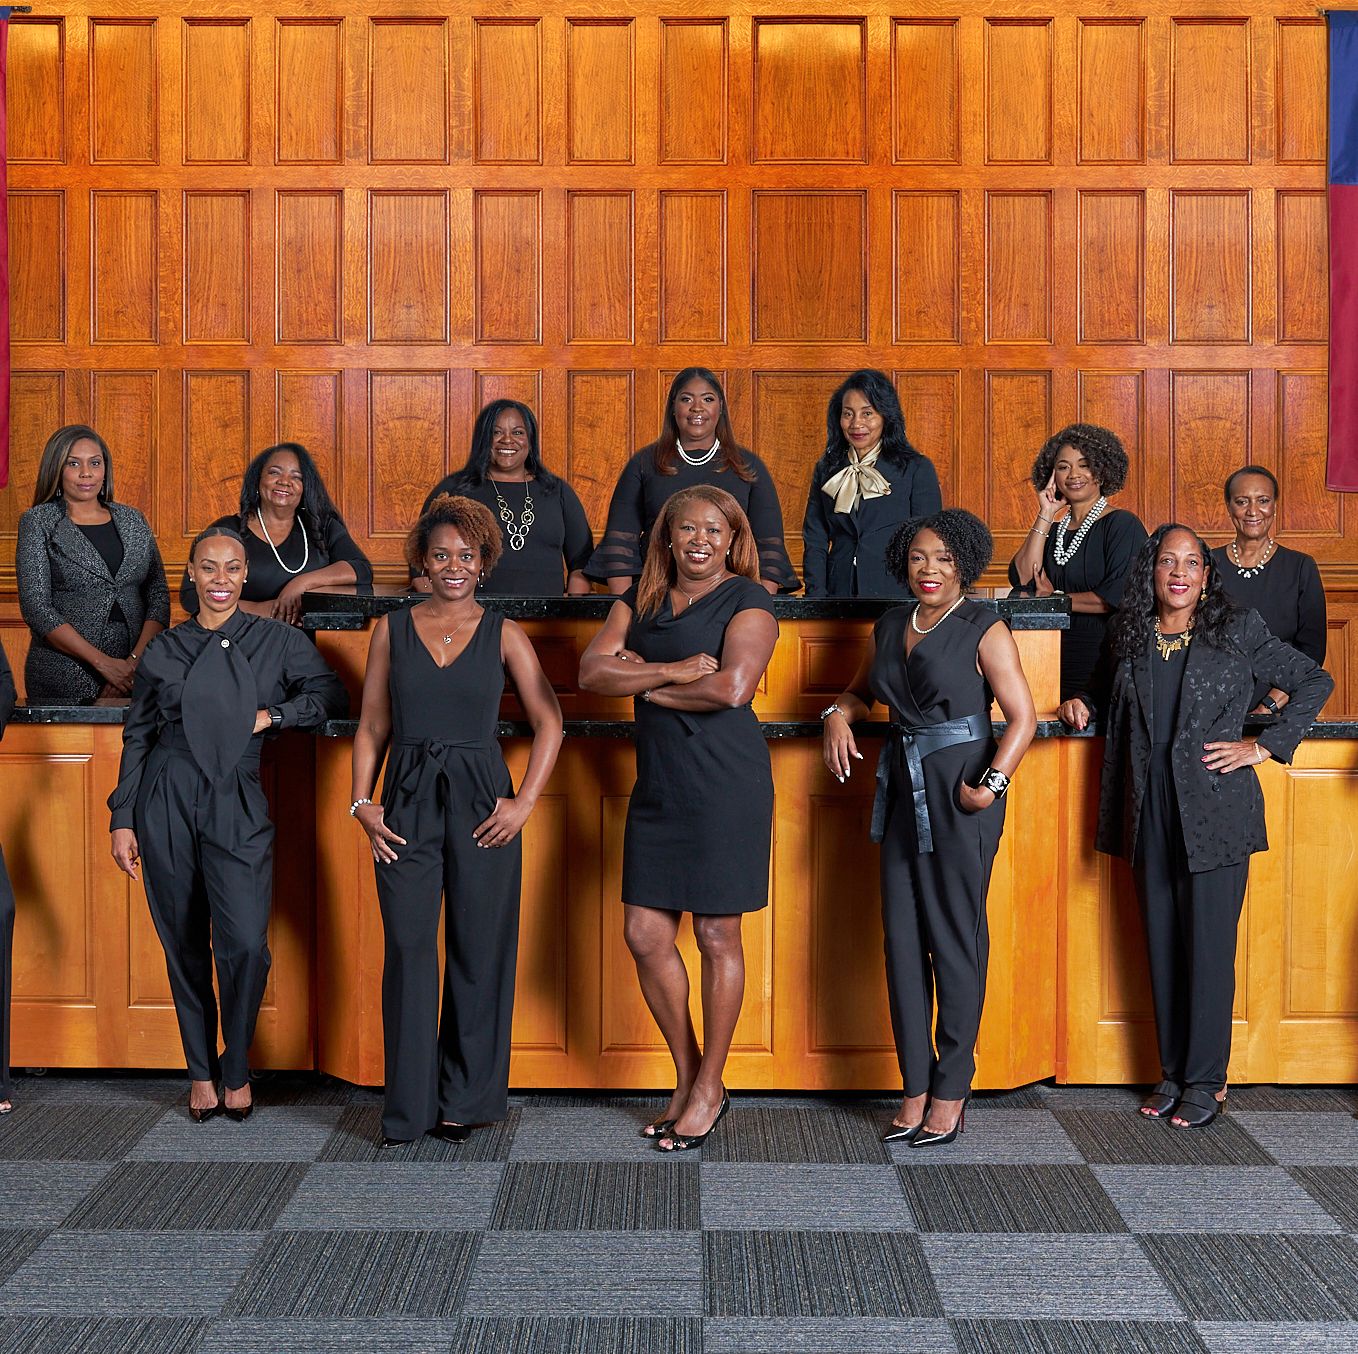 On a smothering hot summer day in 2018, 19 Texas women—all of them Black, all of them pillars in the legal community—got in formation for a photoshoot. Sharing knowing nods and confident smiles, they felt another very powerful figure in the room: Beyoncé was booming in the background.

<br><br>As the women looked into the camera, they were also looking toward a groundbreaking future. Each was campaigning for a different judgeship in Harris County, one of the most racially and ethnically diverse areas in Houston. Many had been friends for years, but making history as the largest group of Black women elected to judicial seats in Harris County could surely bond them forever.

<br><br>Not long after the photo was taken, every single one of them won their races. The victory made national headlines and cemented their legacy in judicial history. “When you go through something so life changing, you can’t help but to be bonded,” Juvenile District Court Judge Michelle Moore said later. “There’s nothing else that we could have called each other except ‘Sister Judges.’”

<br><br>Now, four years later, ELLE went to Houston and gathered the Sister Judges—14 of whom are up for reelection this November—to recreate their iconic photo in a south Houston courtroom.